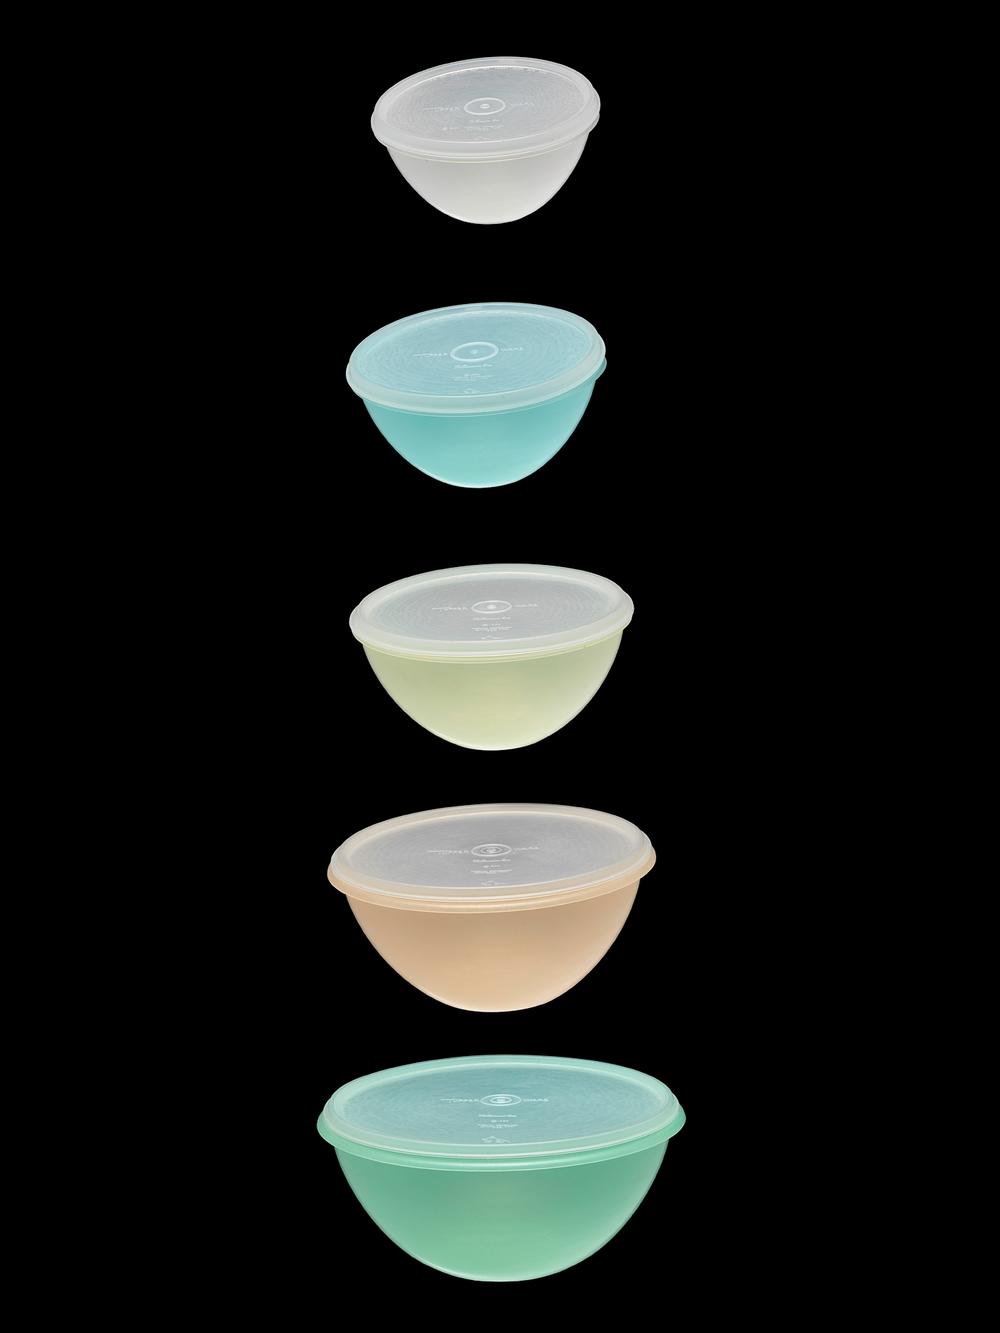 Classic Tupperware bowls on display at the Smithsonian's National Museum of American History in Washington, D.C.